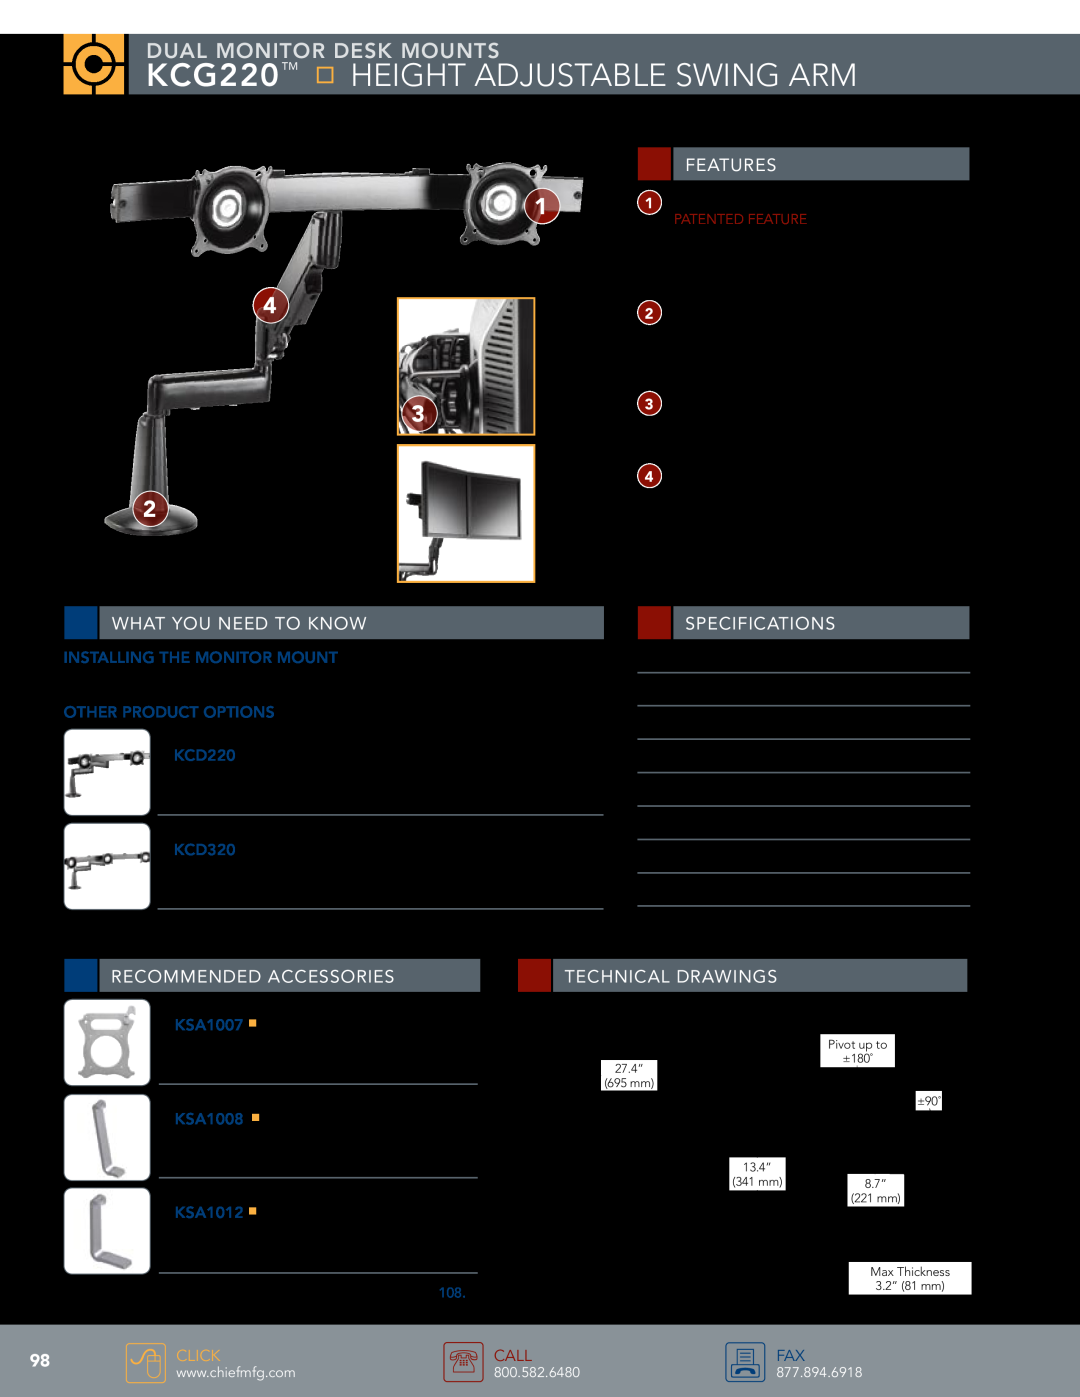 Chief Manufacturing specifications KCG220 Height Adjustable Swing Arm, Dual monitor Desk mounts, Features, KCD320, Call 